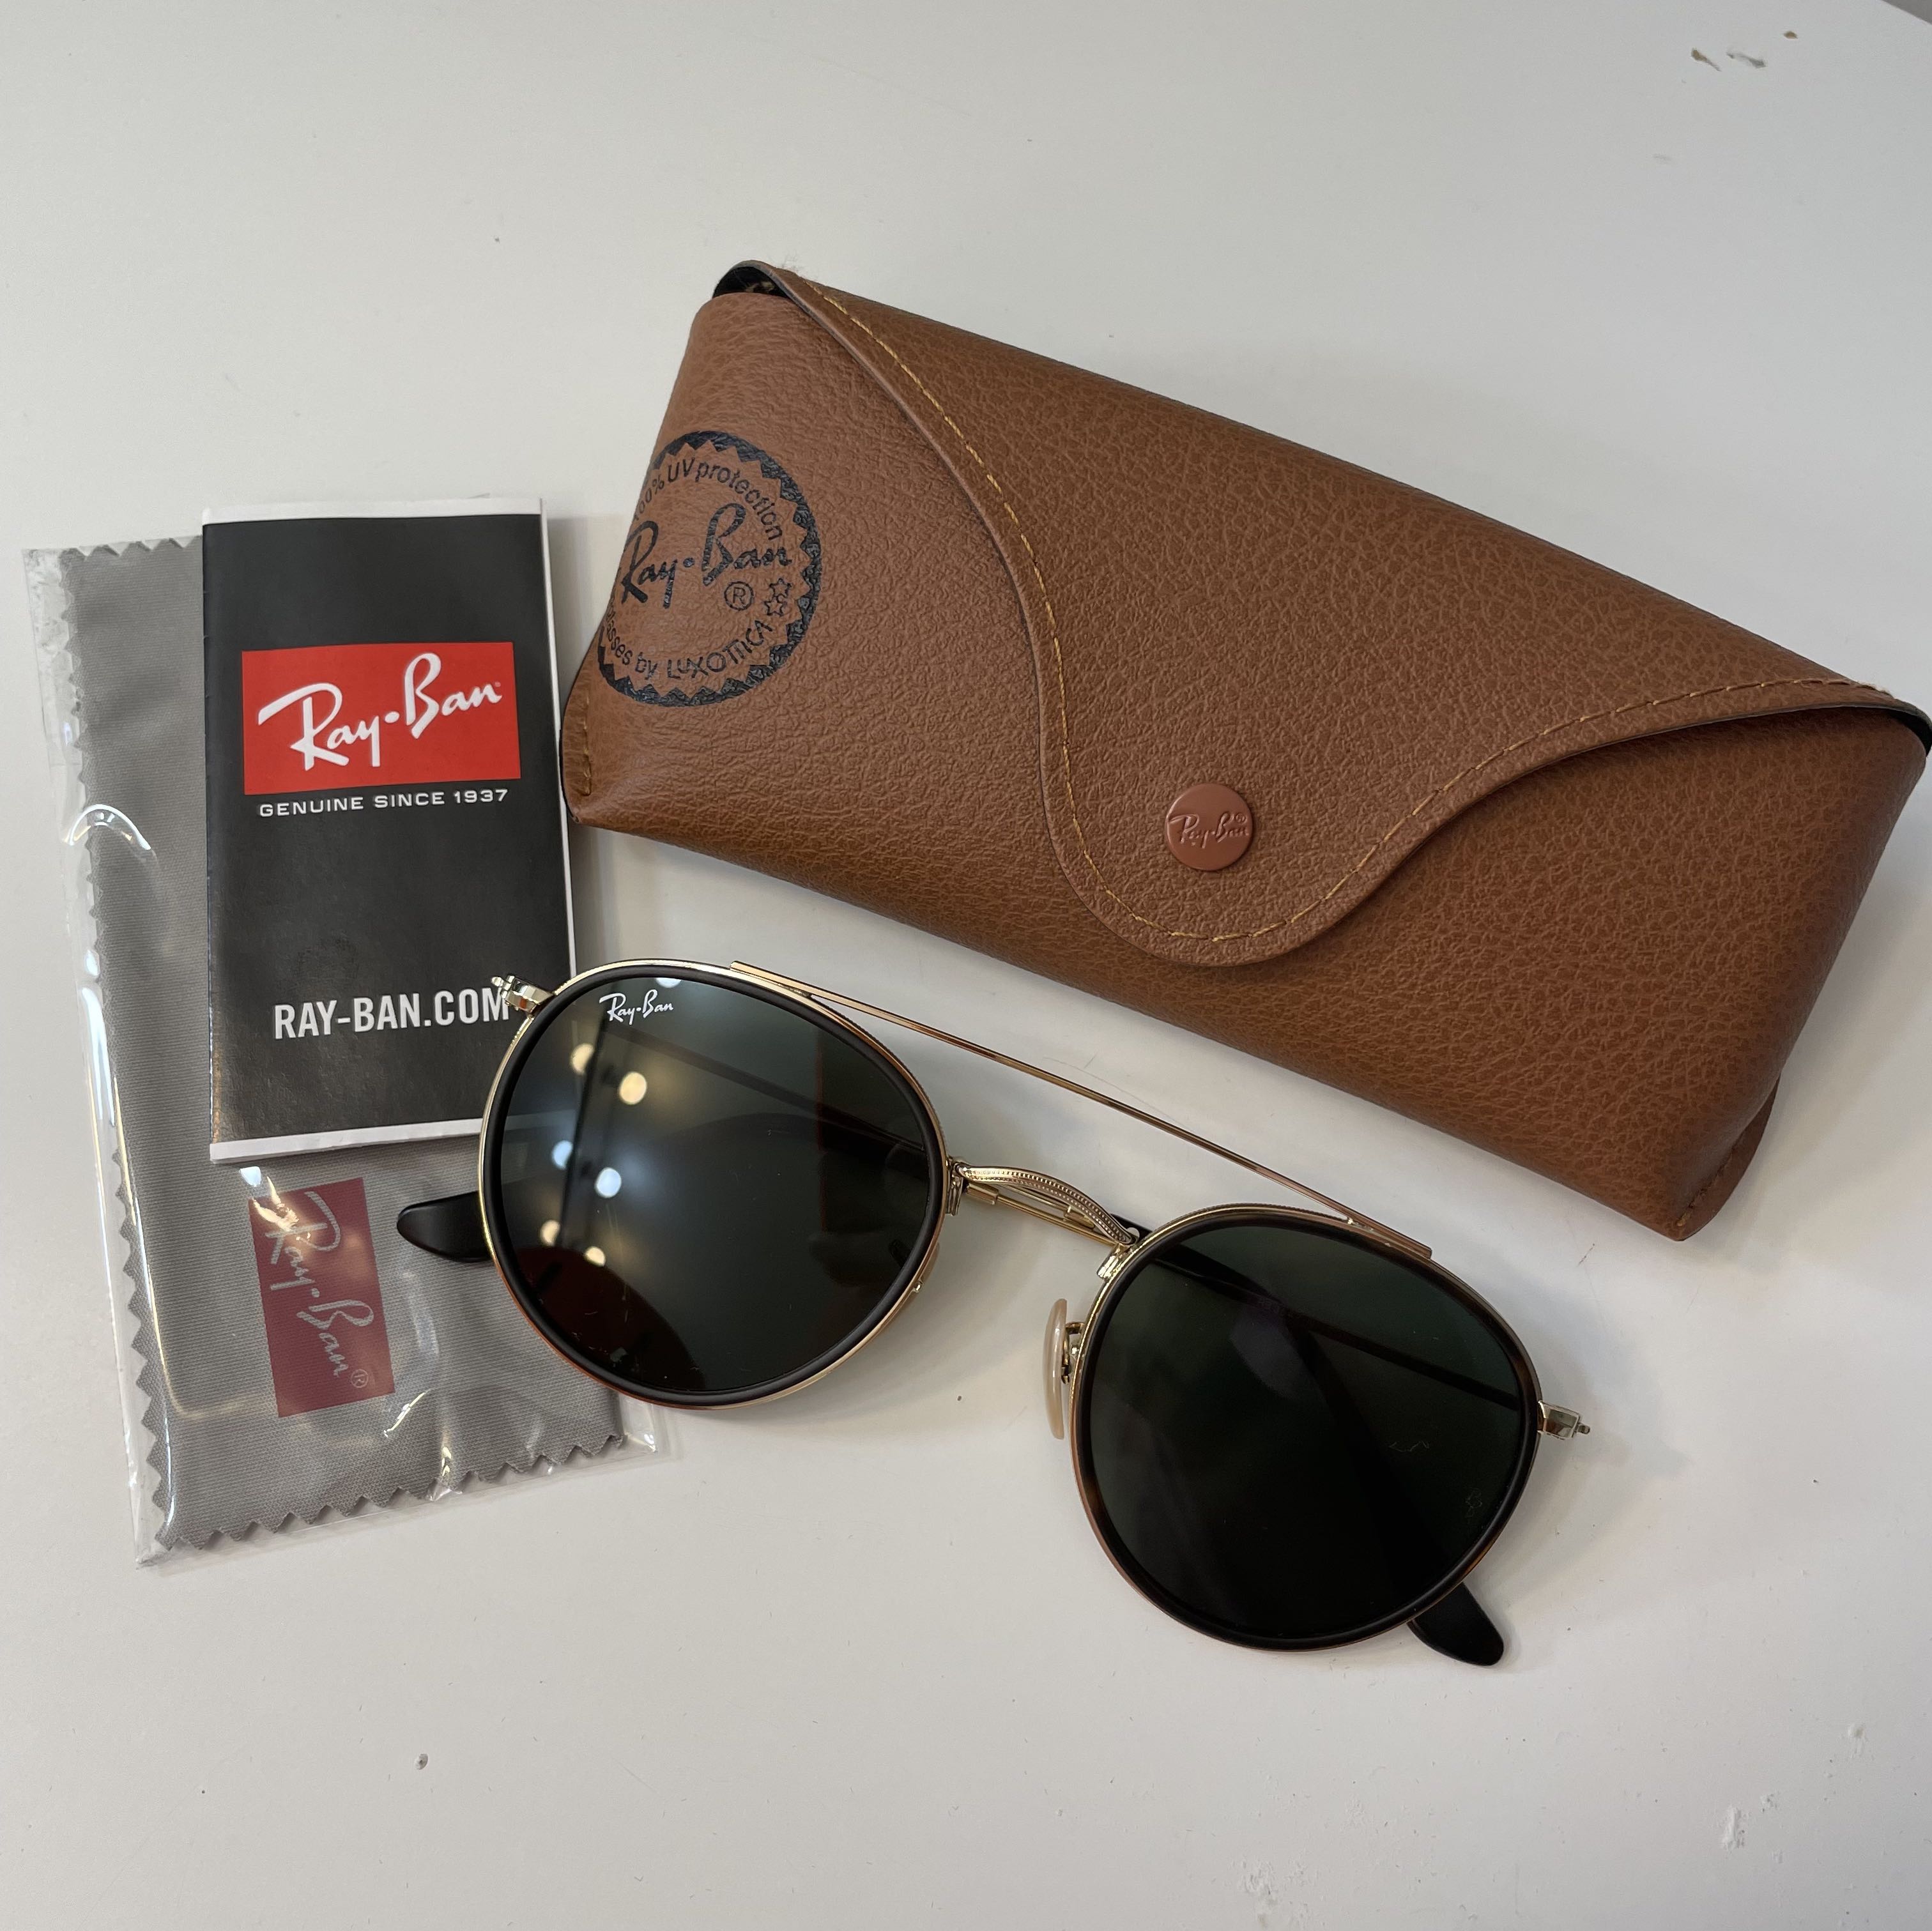 Rayban rb3047 black gold, Women's Fashion, Watches & Accessories ...